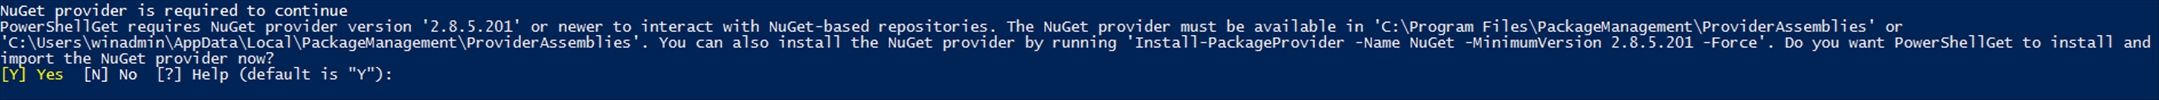 continuous-deployment-to-nano-server-in-azure-p1-007